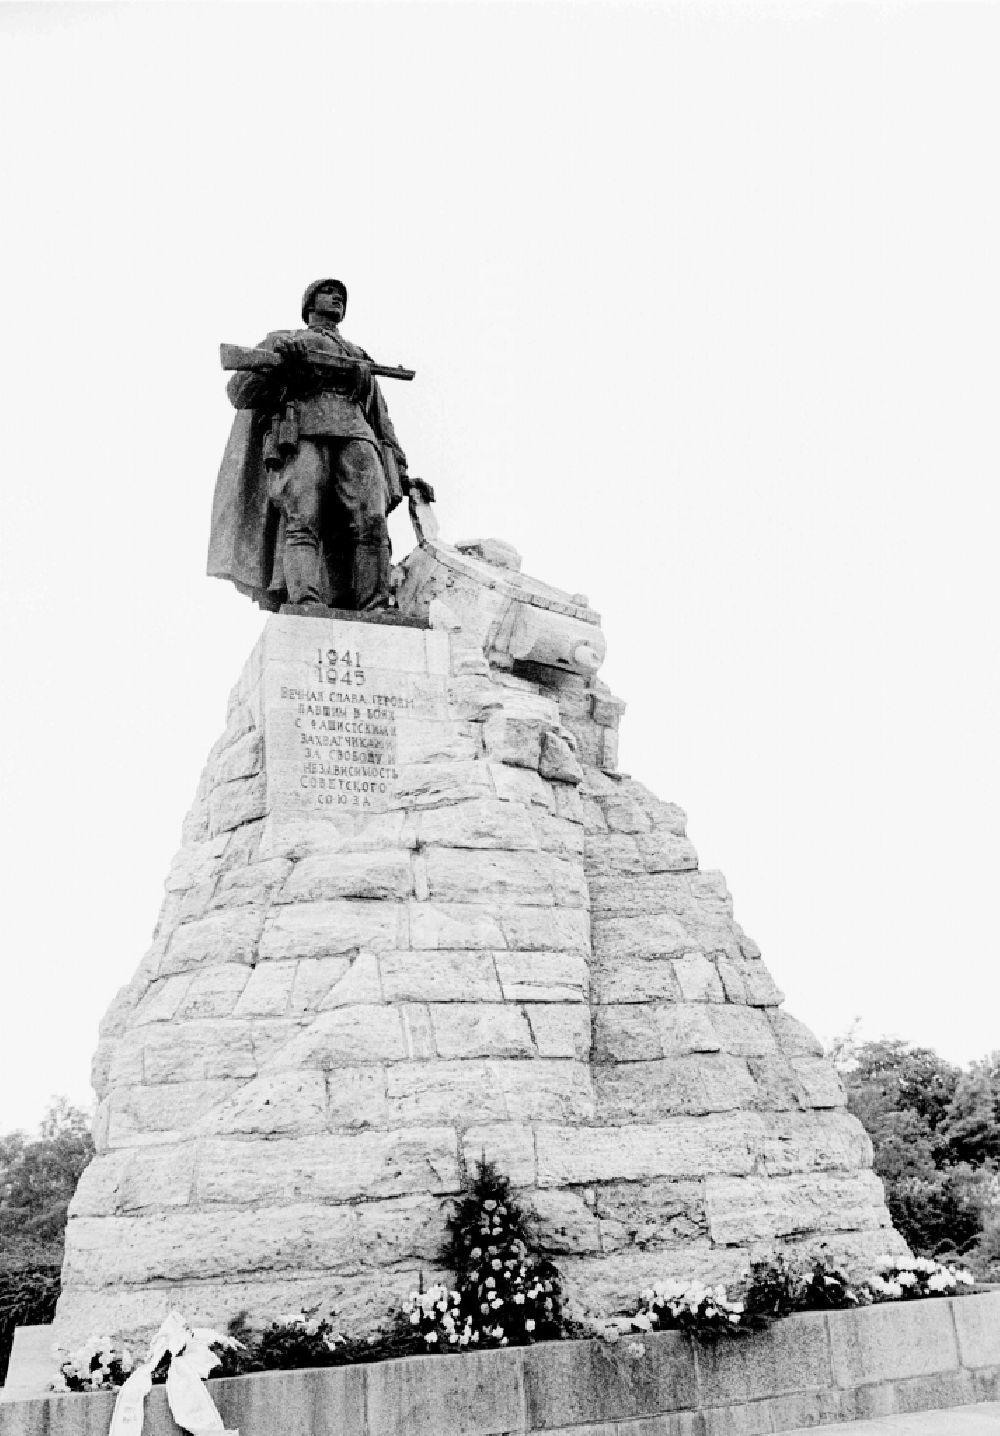 GDR image archive: Seelow - Monument to the fallen russian soldiers by Lew Kerbel, at the Memorial Seelow Heights in Seelow, in the present state of Brandenburg. The bronze figure depicts a Red Army soldier with a submachine gun, standing next to the tower of a destroyed German tank